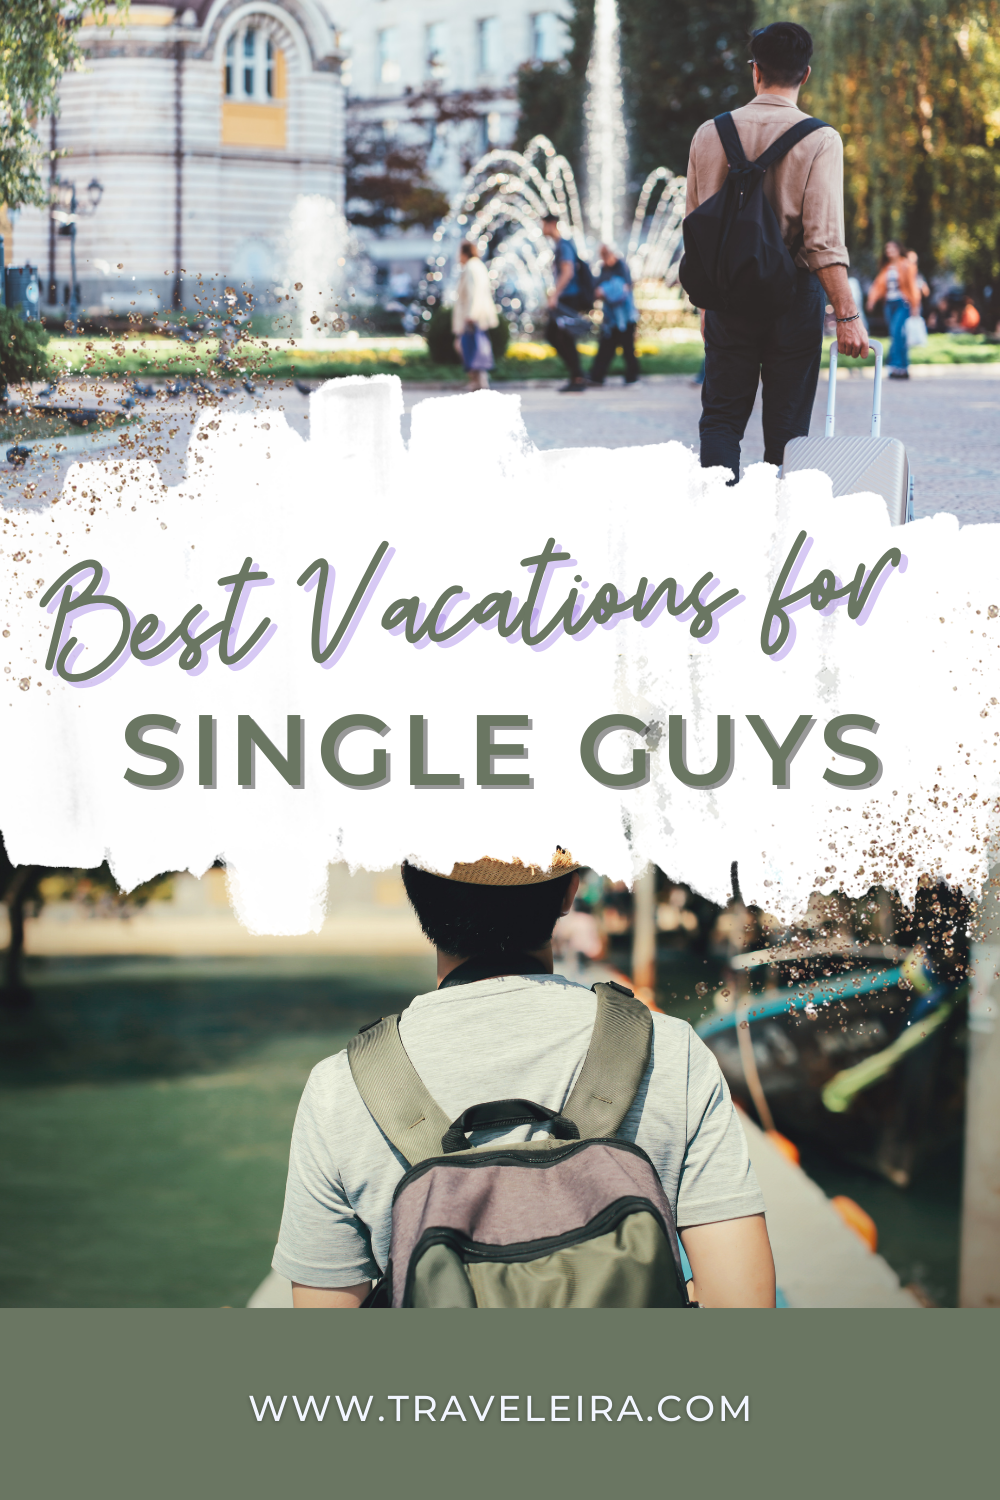 We call out some colleagues to find out some of the best vacations for single guys and the top vacation spots for them.